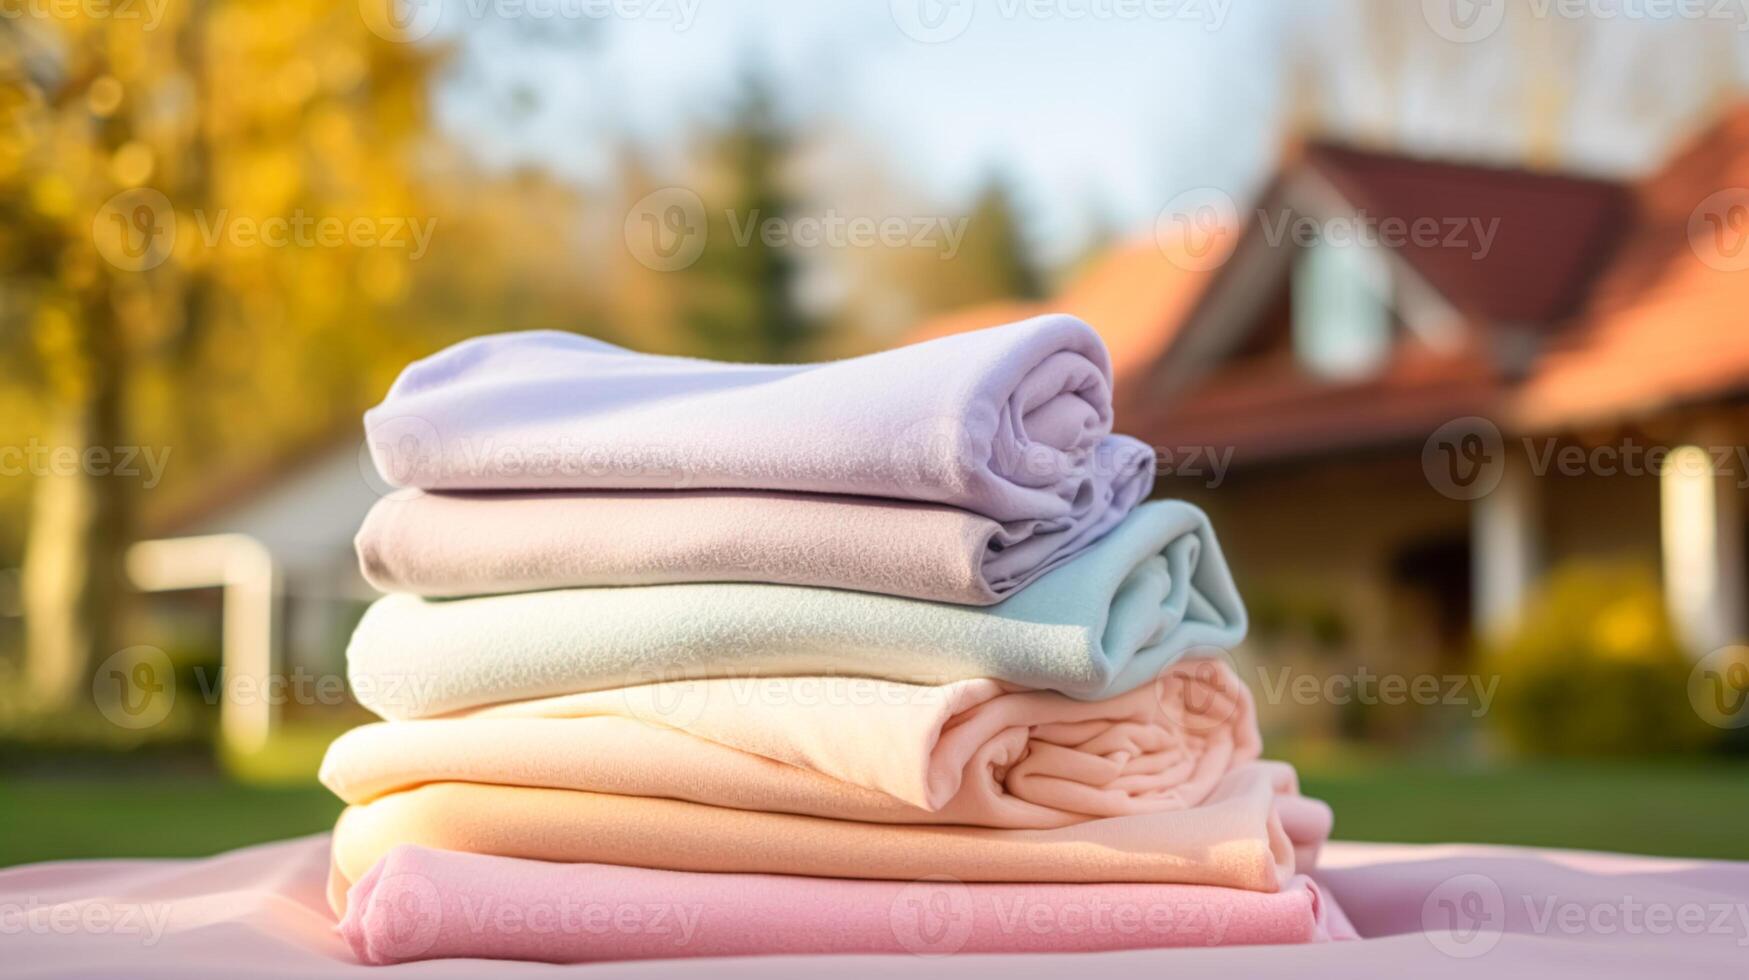 Laundry, housekeeping and homemaking, stack of clean and folded clothes in country house garden, photo